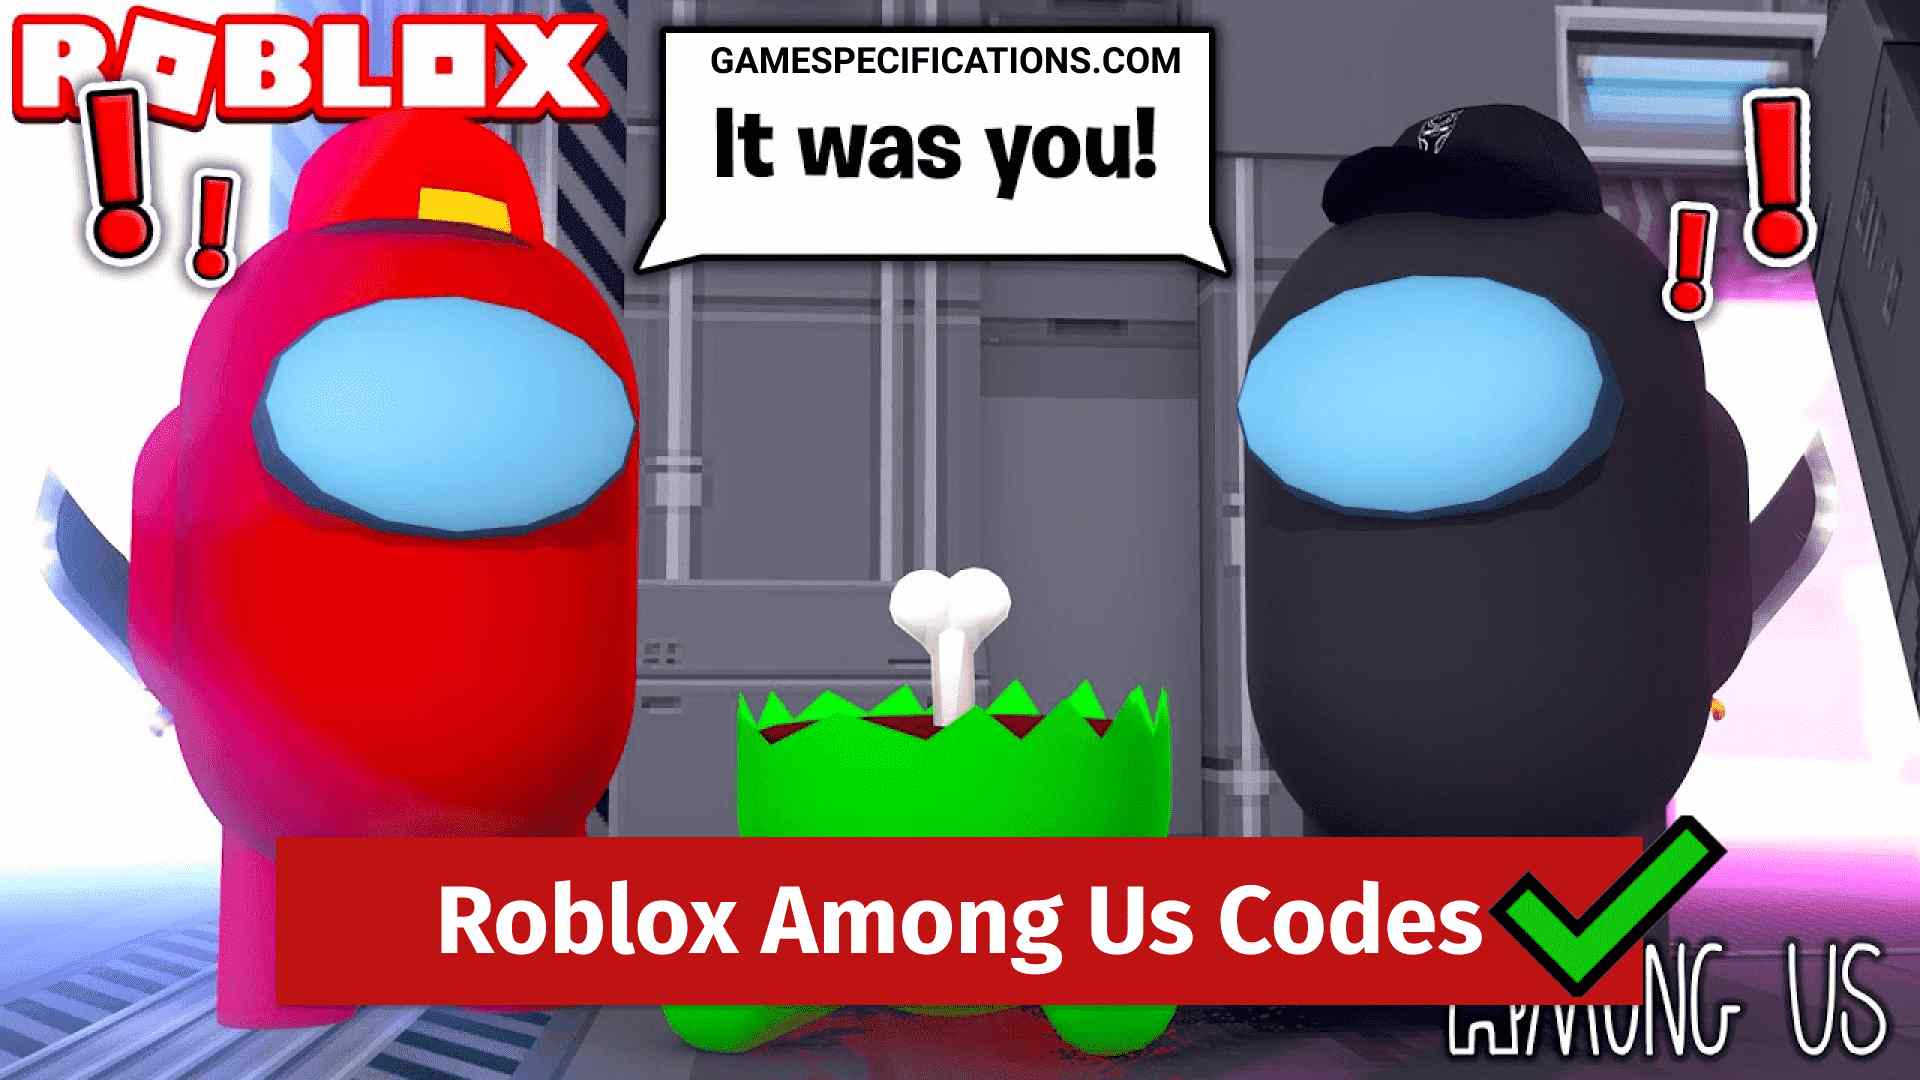 3 Roblox Among Us Codes For Free Pets July 2021 Game Specifications - roblox among us codes 2020